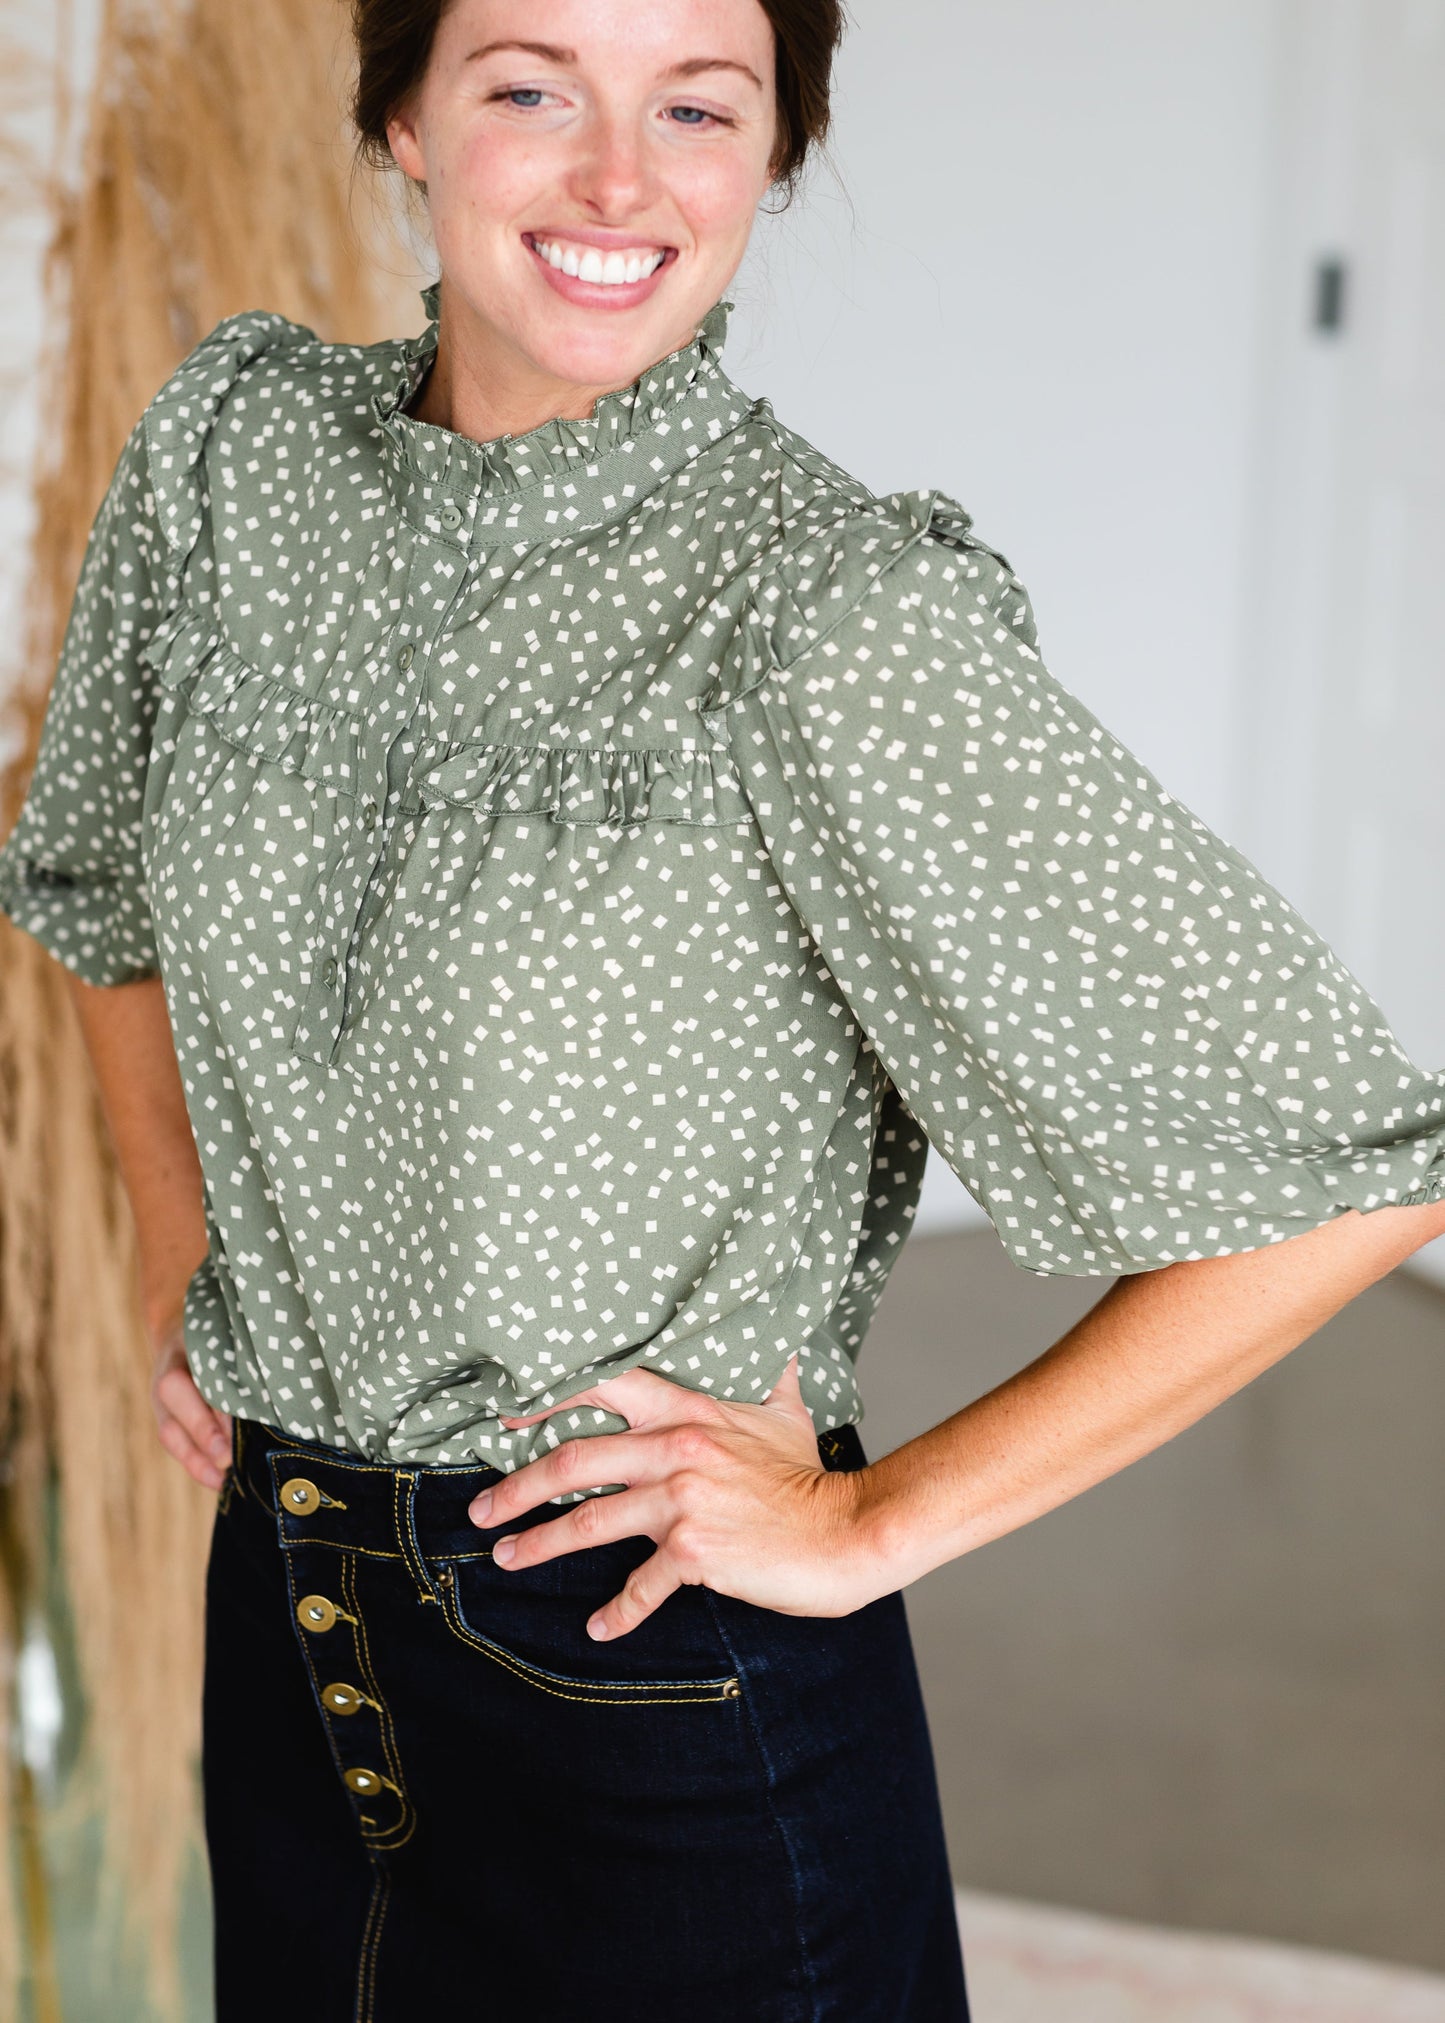 Olive Patterned Ruffle Top - FINAL SALE Tops